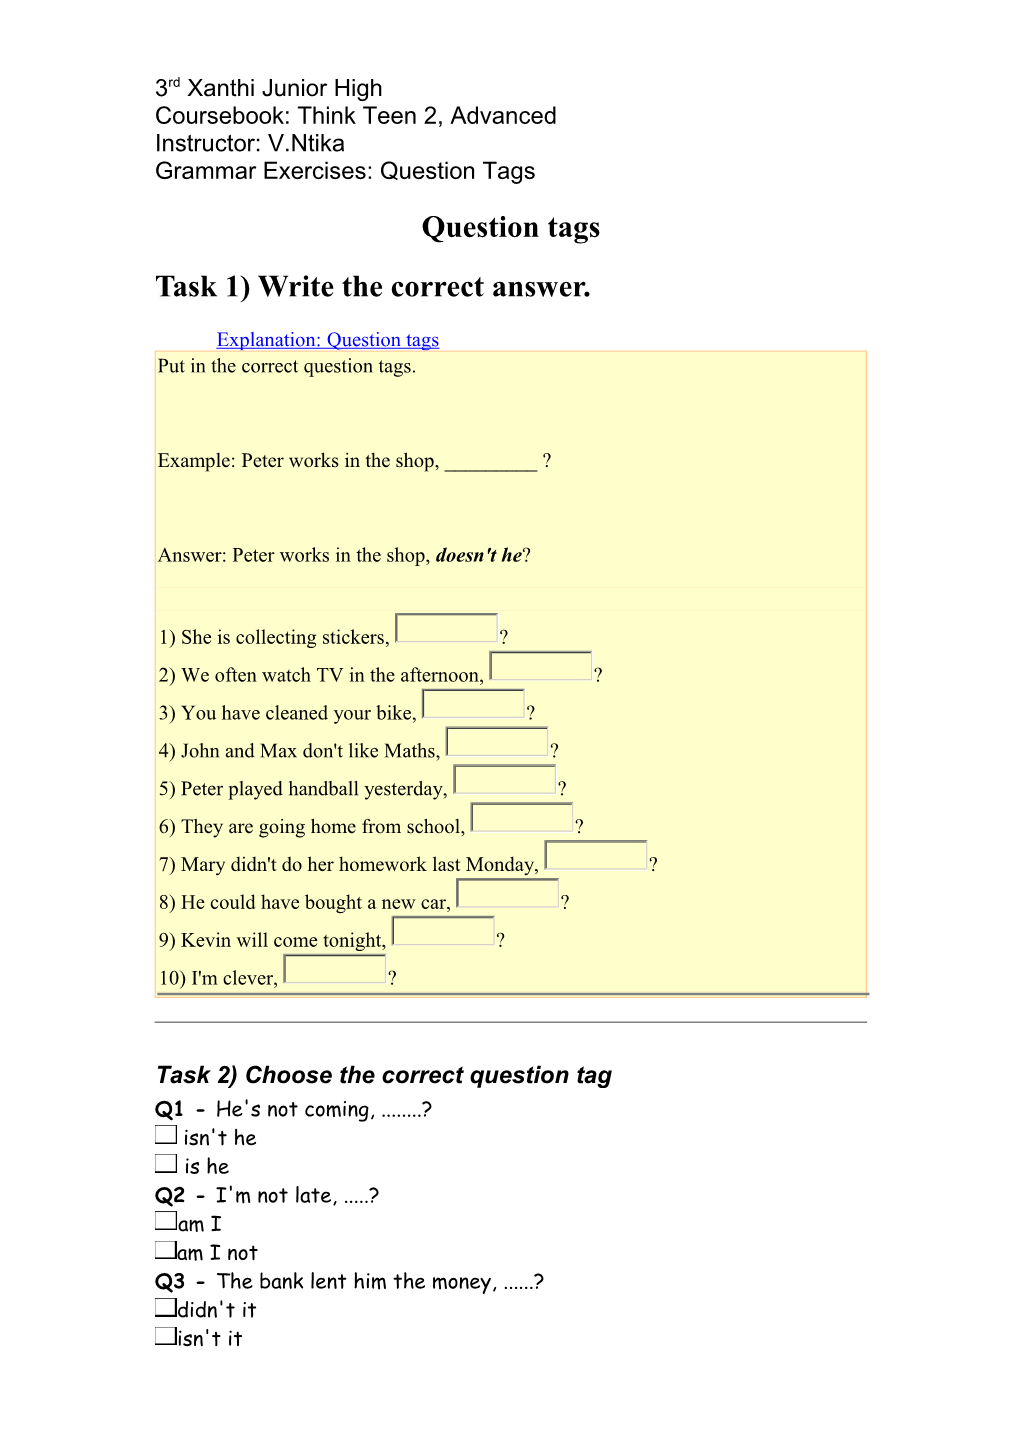 Question Tags - Fill-In Exercise 3